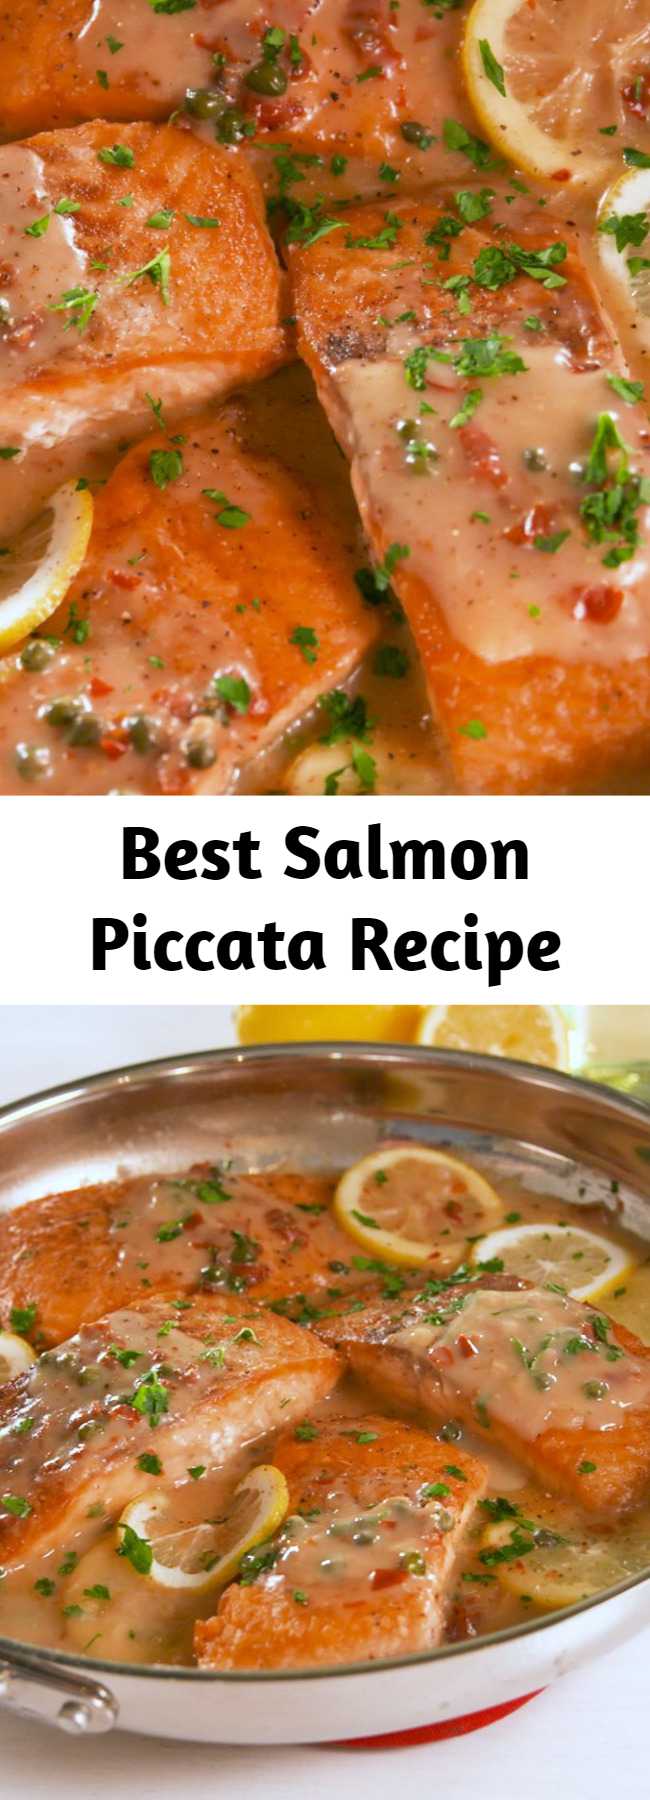 Best Salmon Piccata Recipe - Tender lemony salmon piccata is ready in 30 min. Fish are friends AND food. #easyrecipe #salmon #seafood #dinner #fish